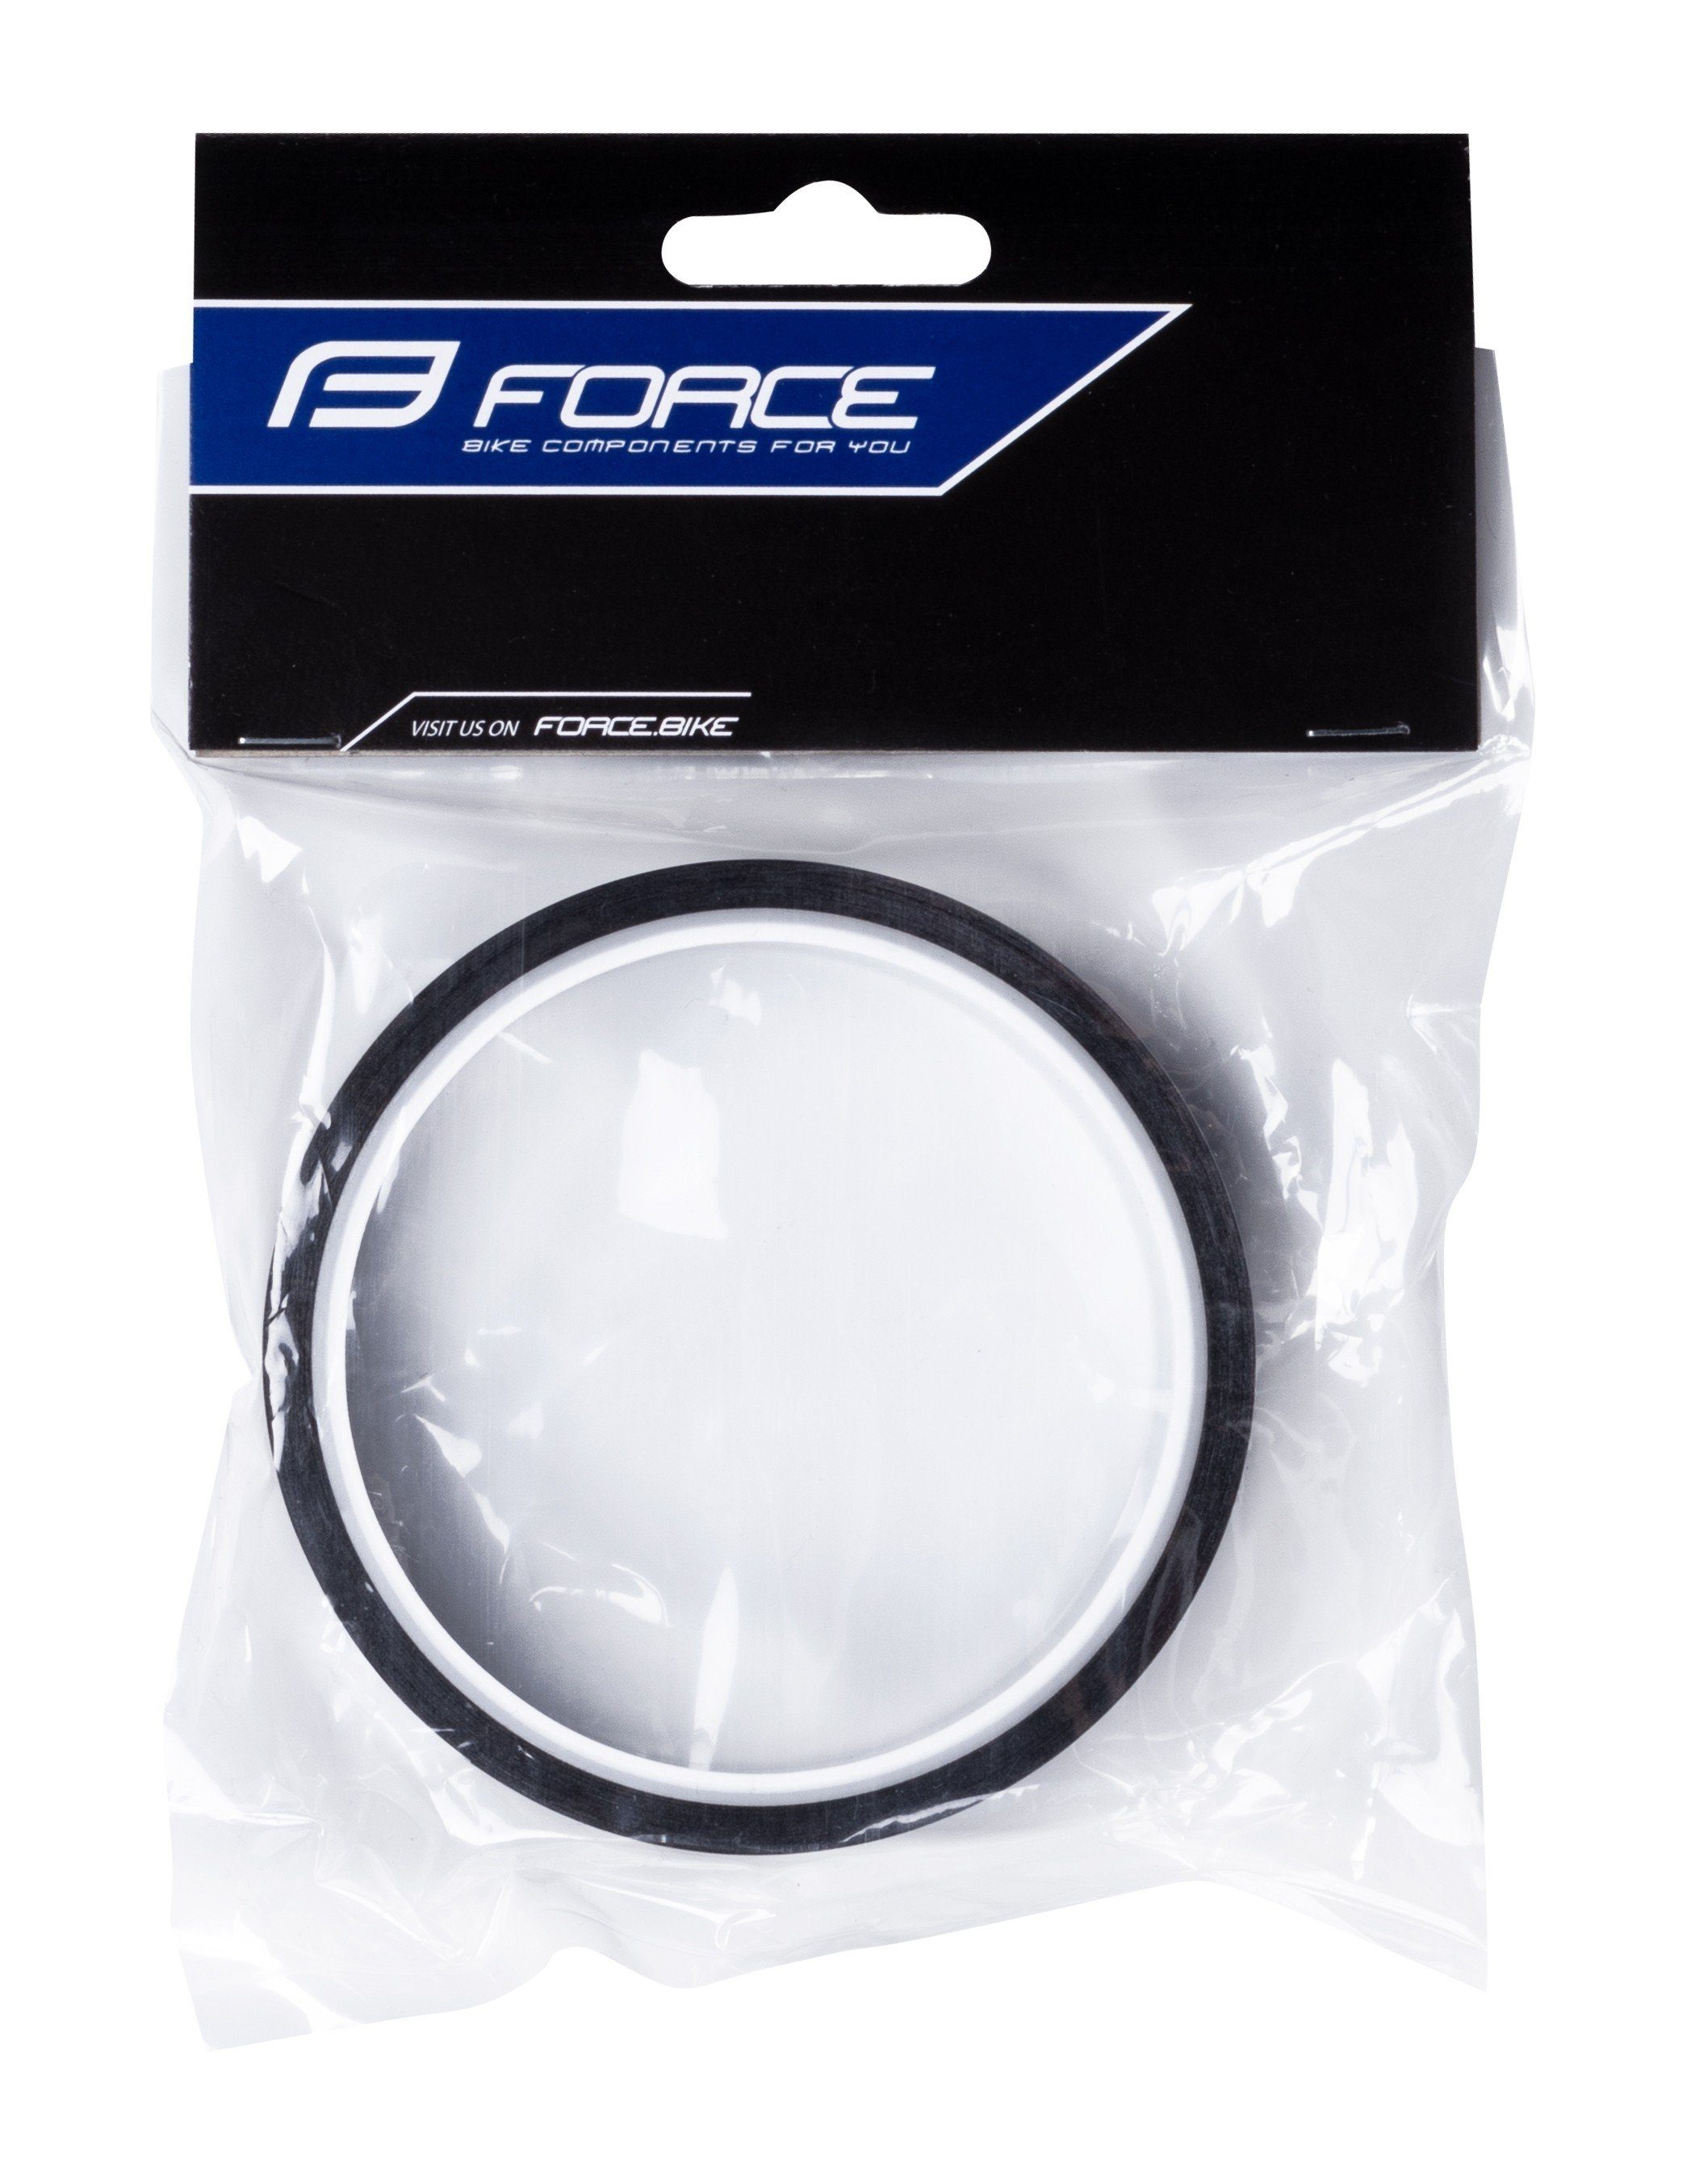 x tape FORCE rim 25mm Tubeless Fahrradschlauch 10m self-adhesive FORCE